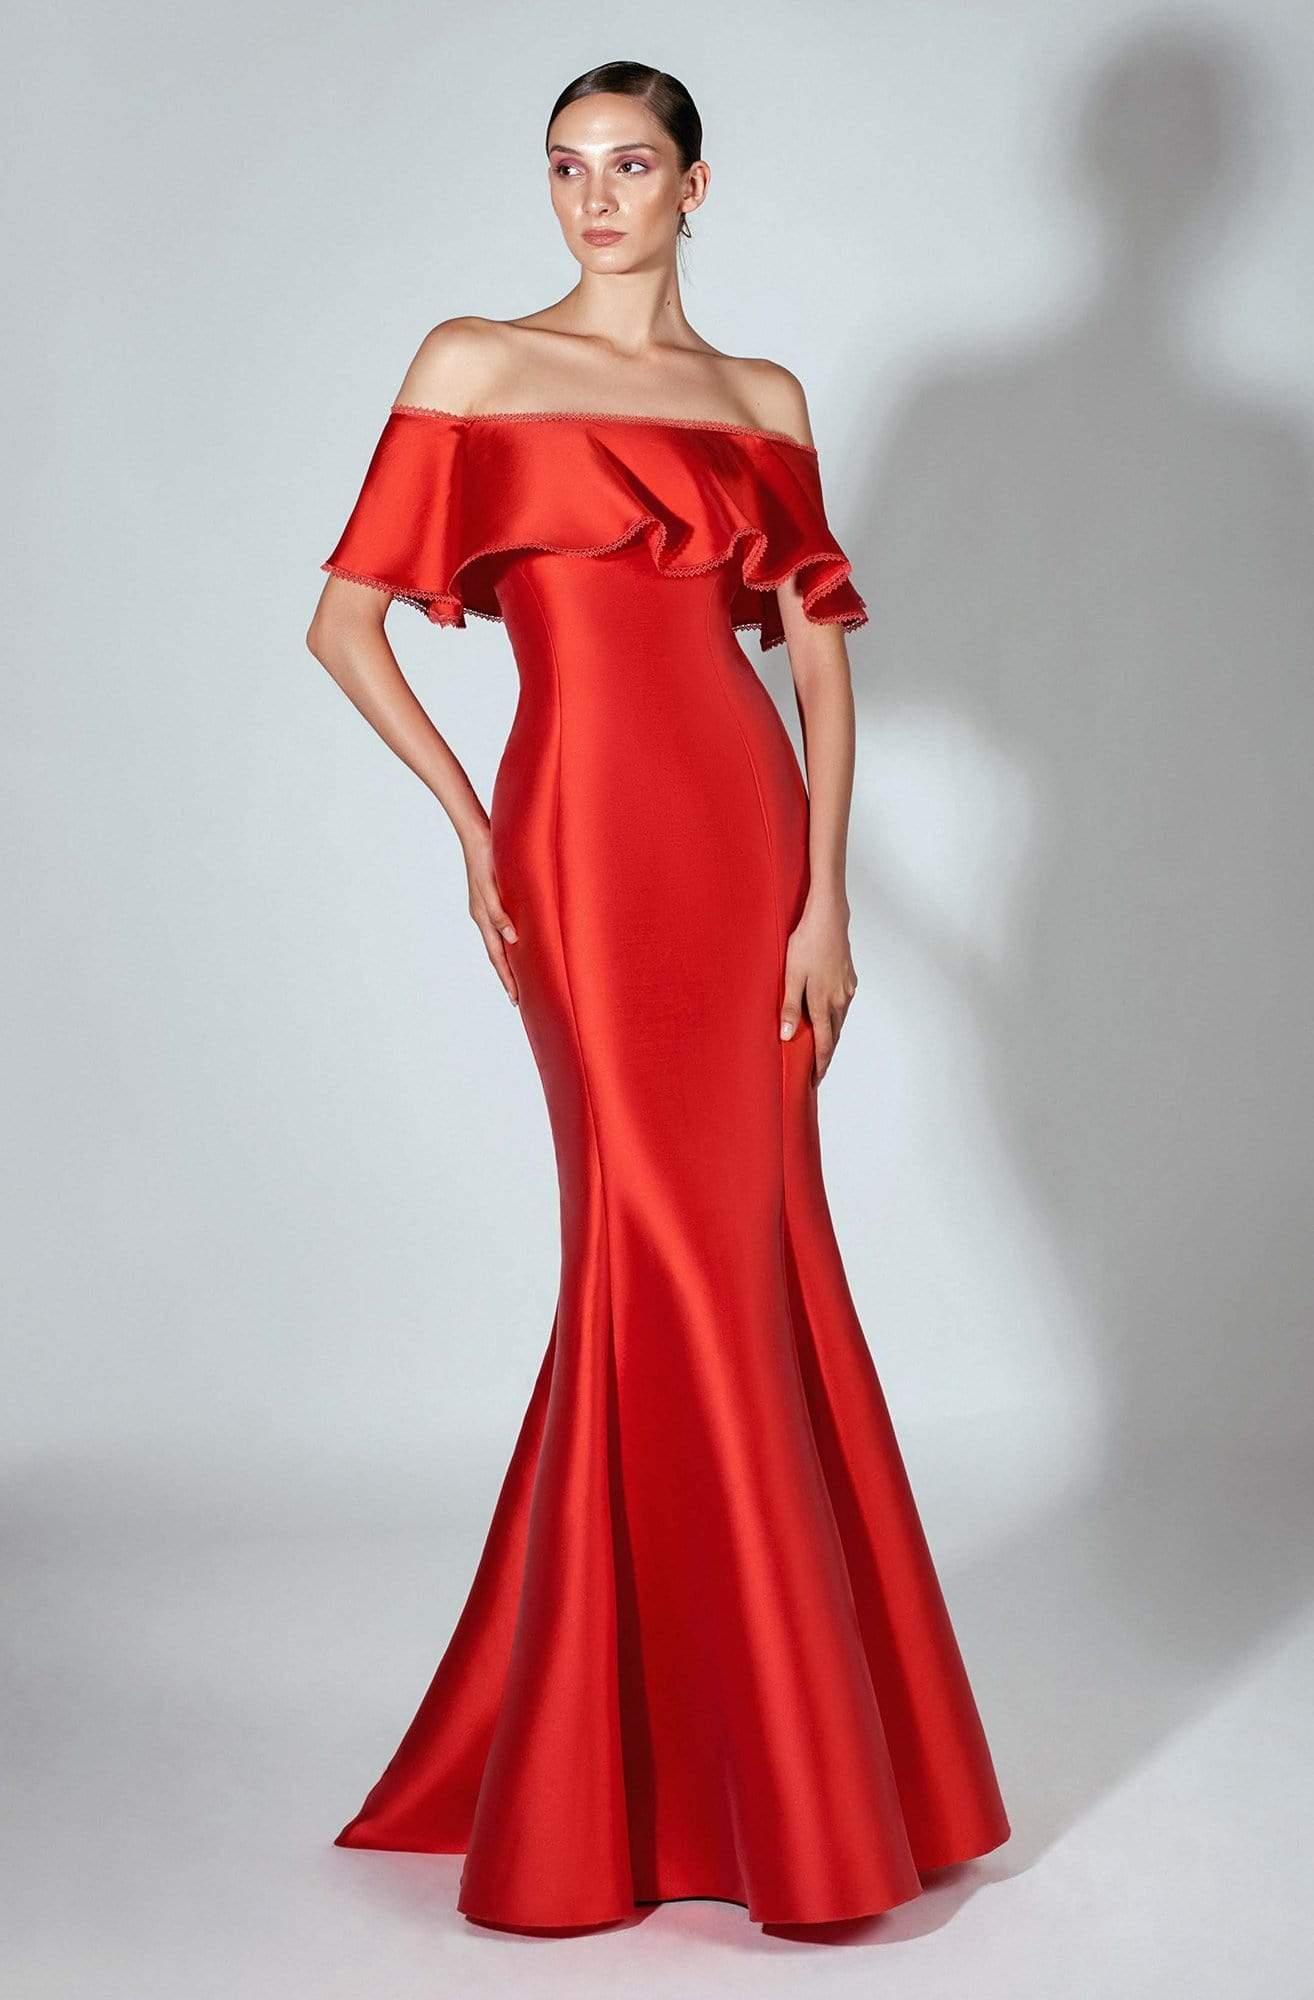 Image of Beside Couture by Gemy - BC 1460 Ruffled Off-Shoulder Mermaid Dress